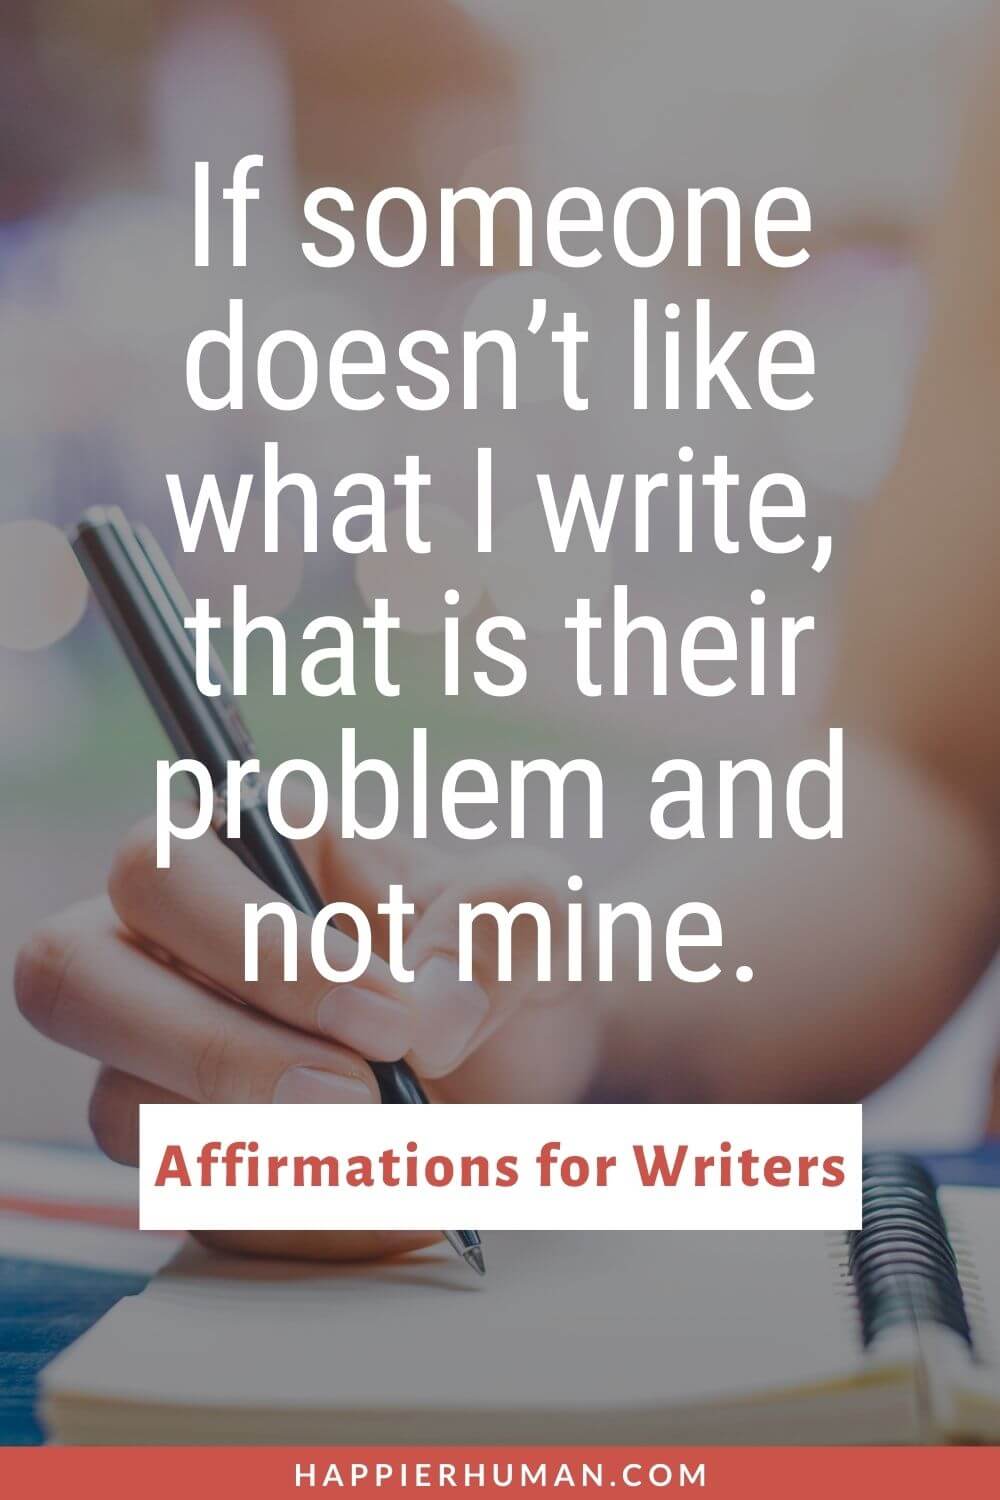 Affirmations for Writers - If someone doesn’t like what I write, that is their problem and not mine. | affirmation for writers block | write from the heart daily affirmations for writers | positive affirmations for writers